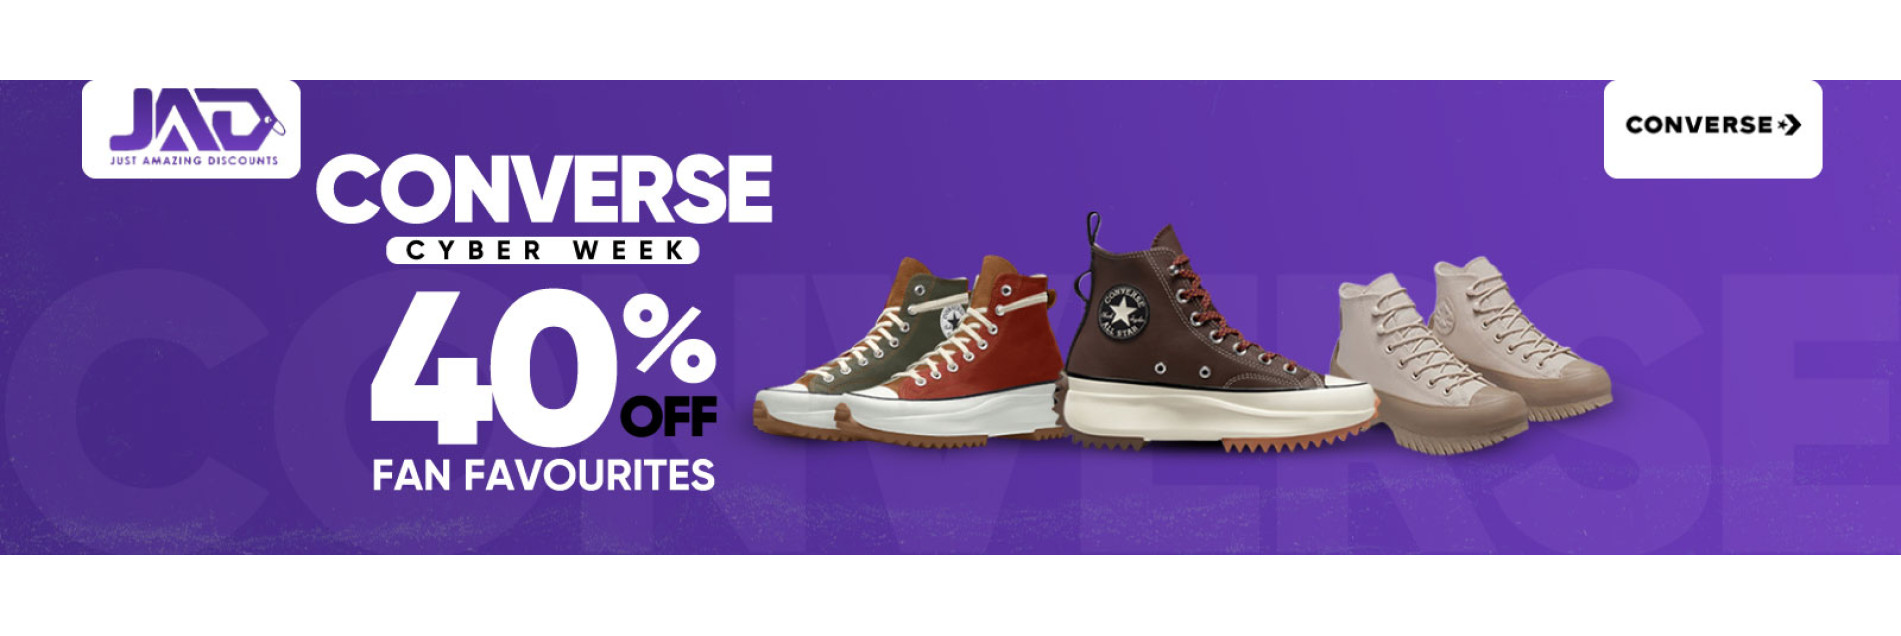 converse store banner